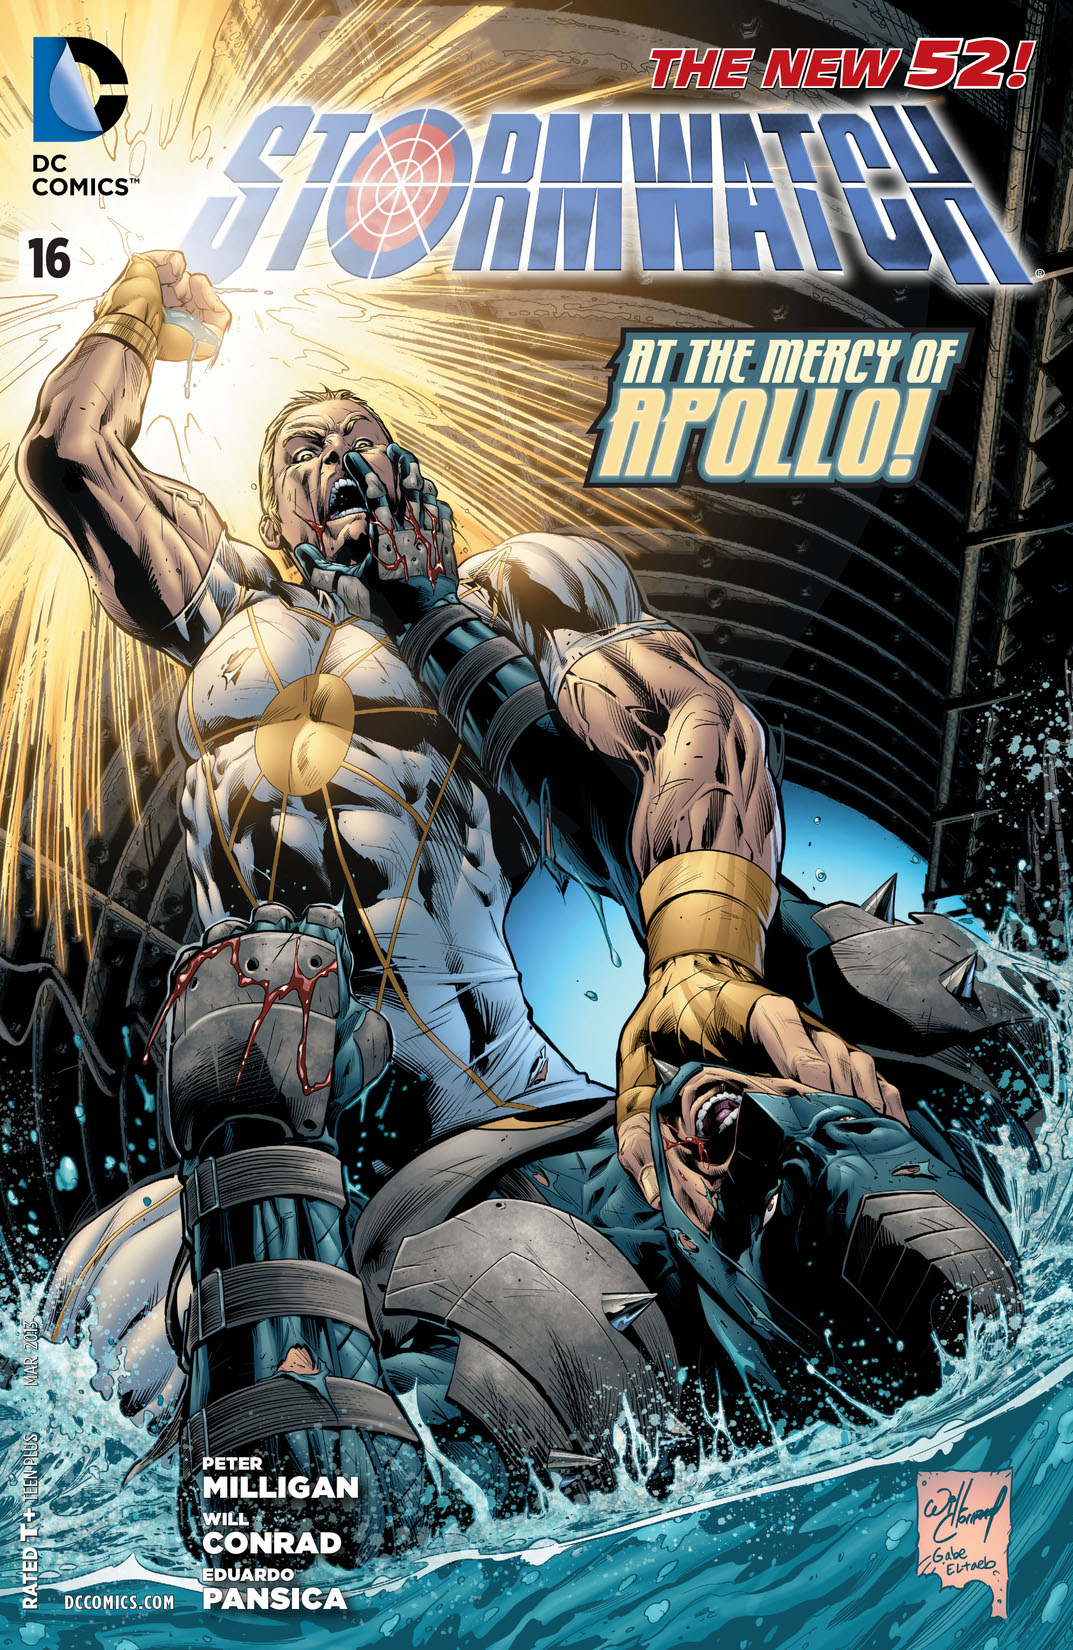 Stormwatch (2011-) #16 preview images